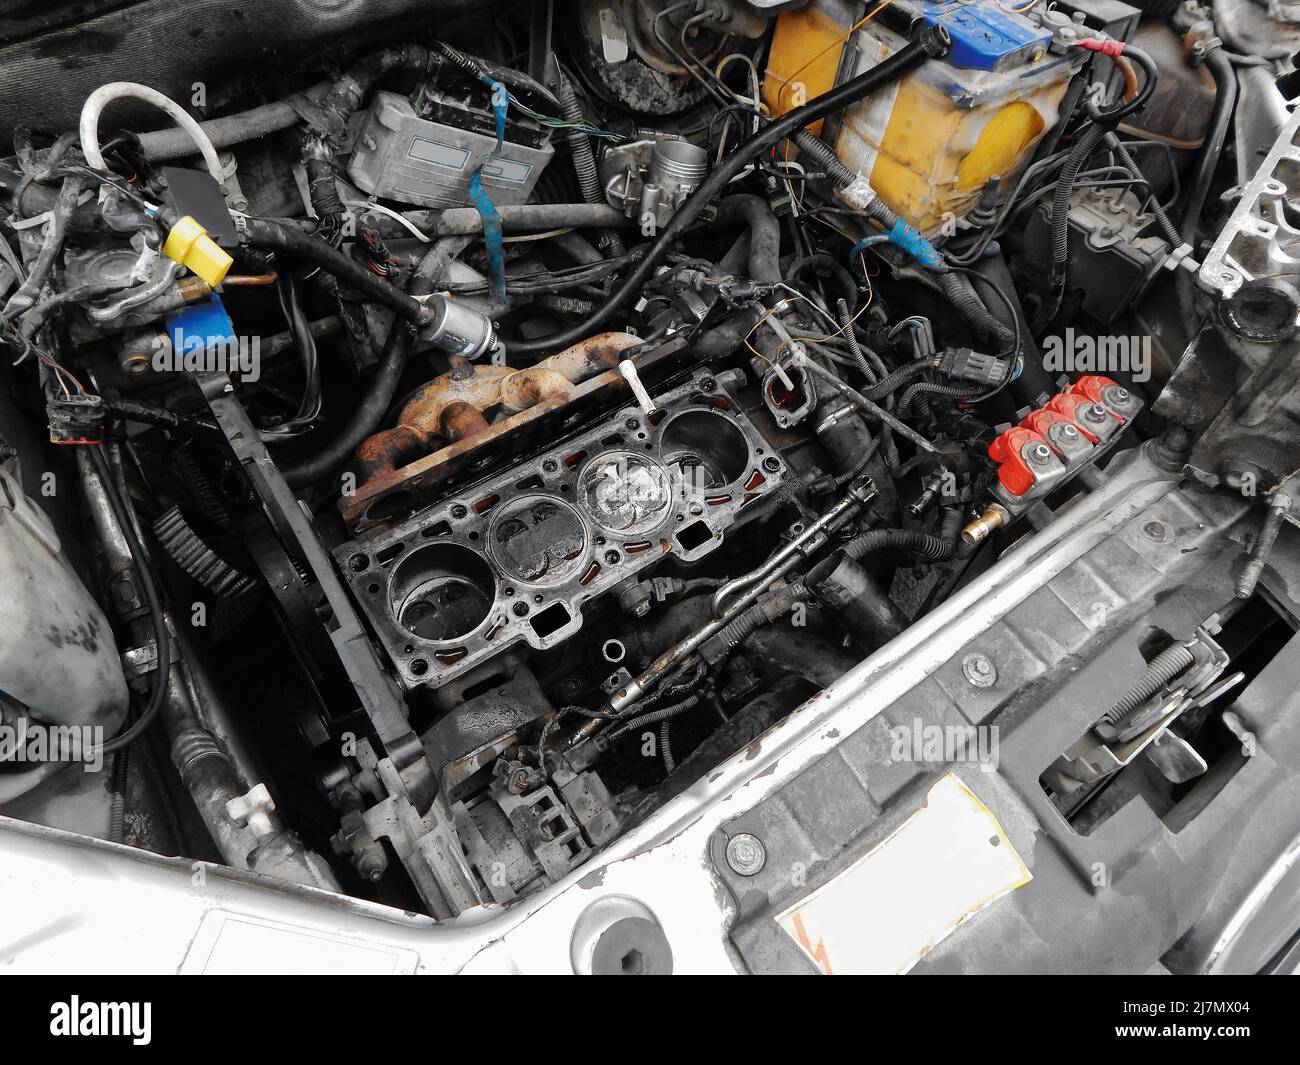 Disassembled engine under the hood of a car. Stock Photo